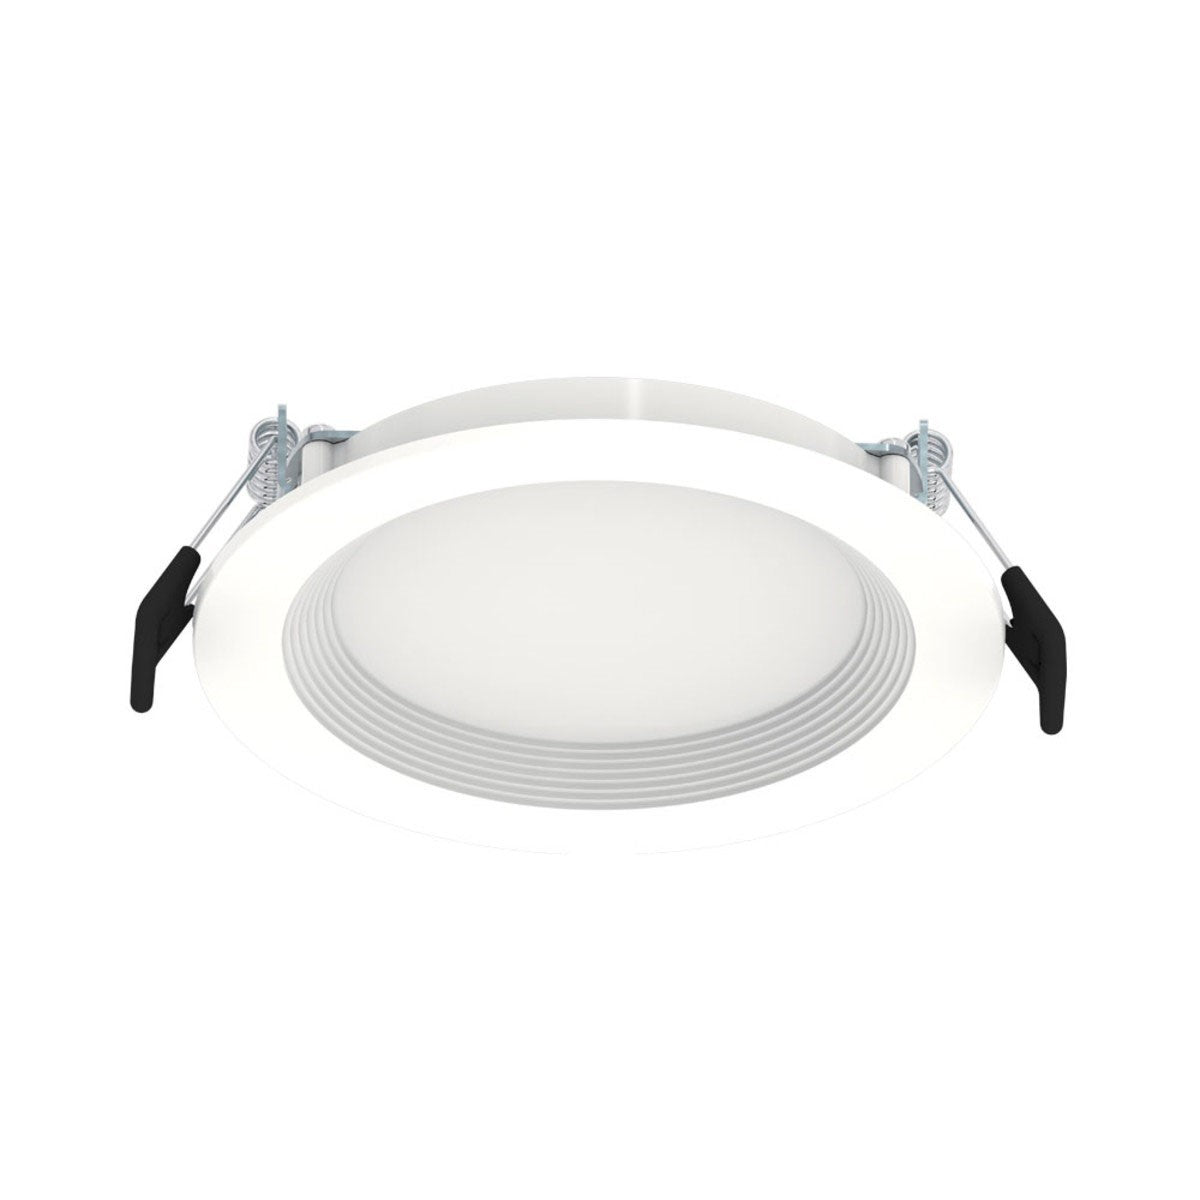 4 In. Wafer Canless LED Recessed Light, 9 Watt, 700 Lumens, Selectable CCT, 2700K to 5000K, Baffle Trim